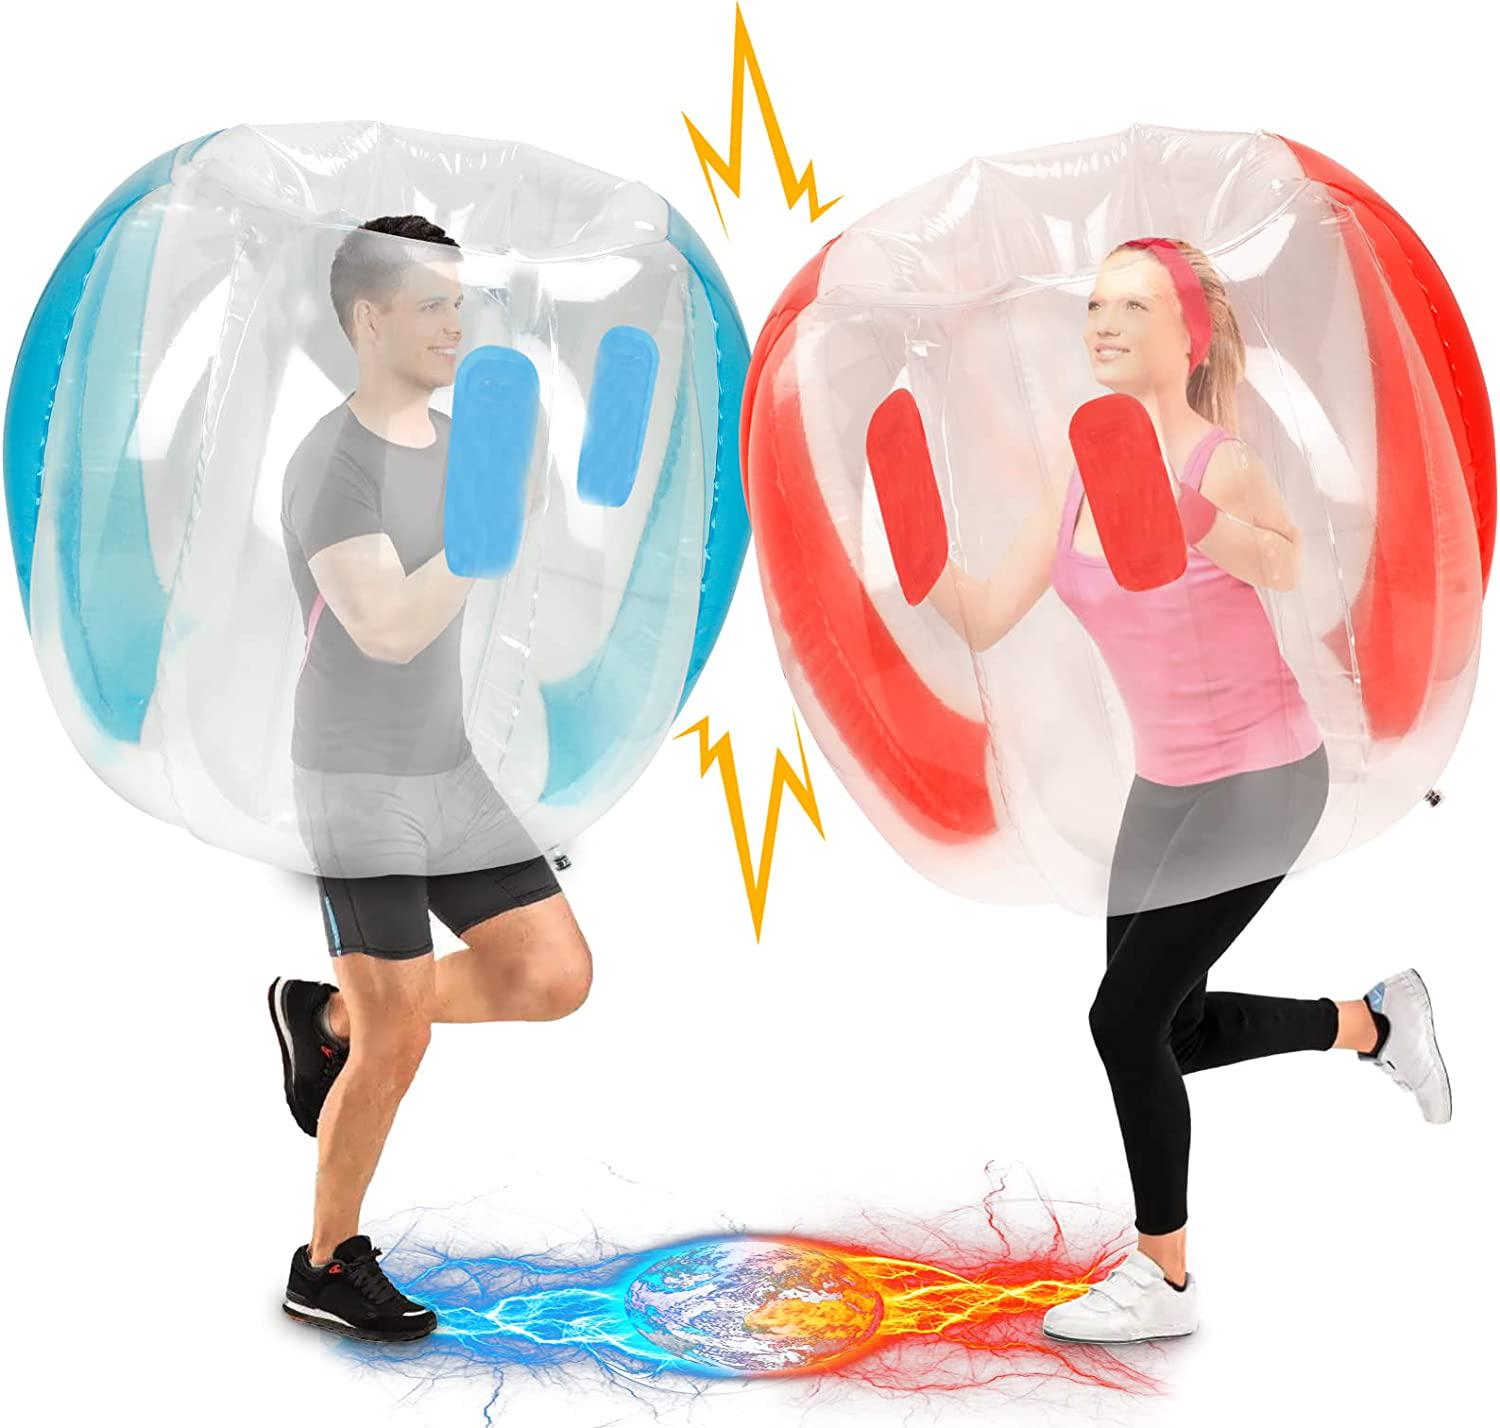 wokohoomer, Kids Bumper Balls 2 Pack, Inflatable Body Bubble Ball Sumo Bumper Bopper Toys, Sports Outdoor Games for Kids